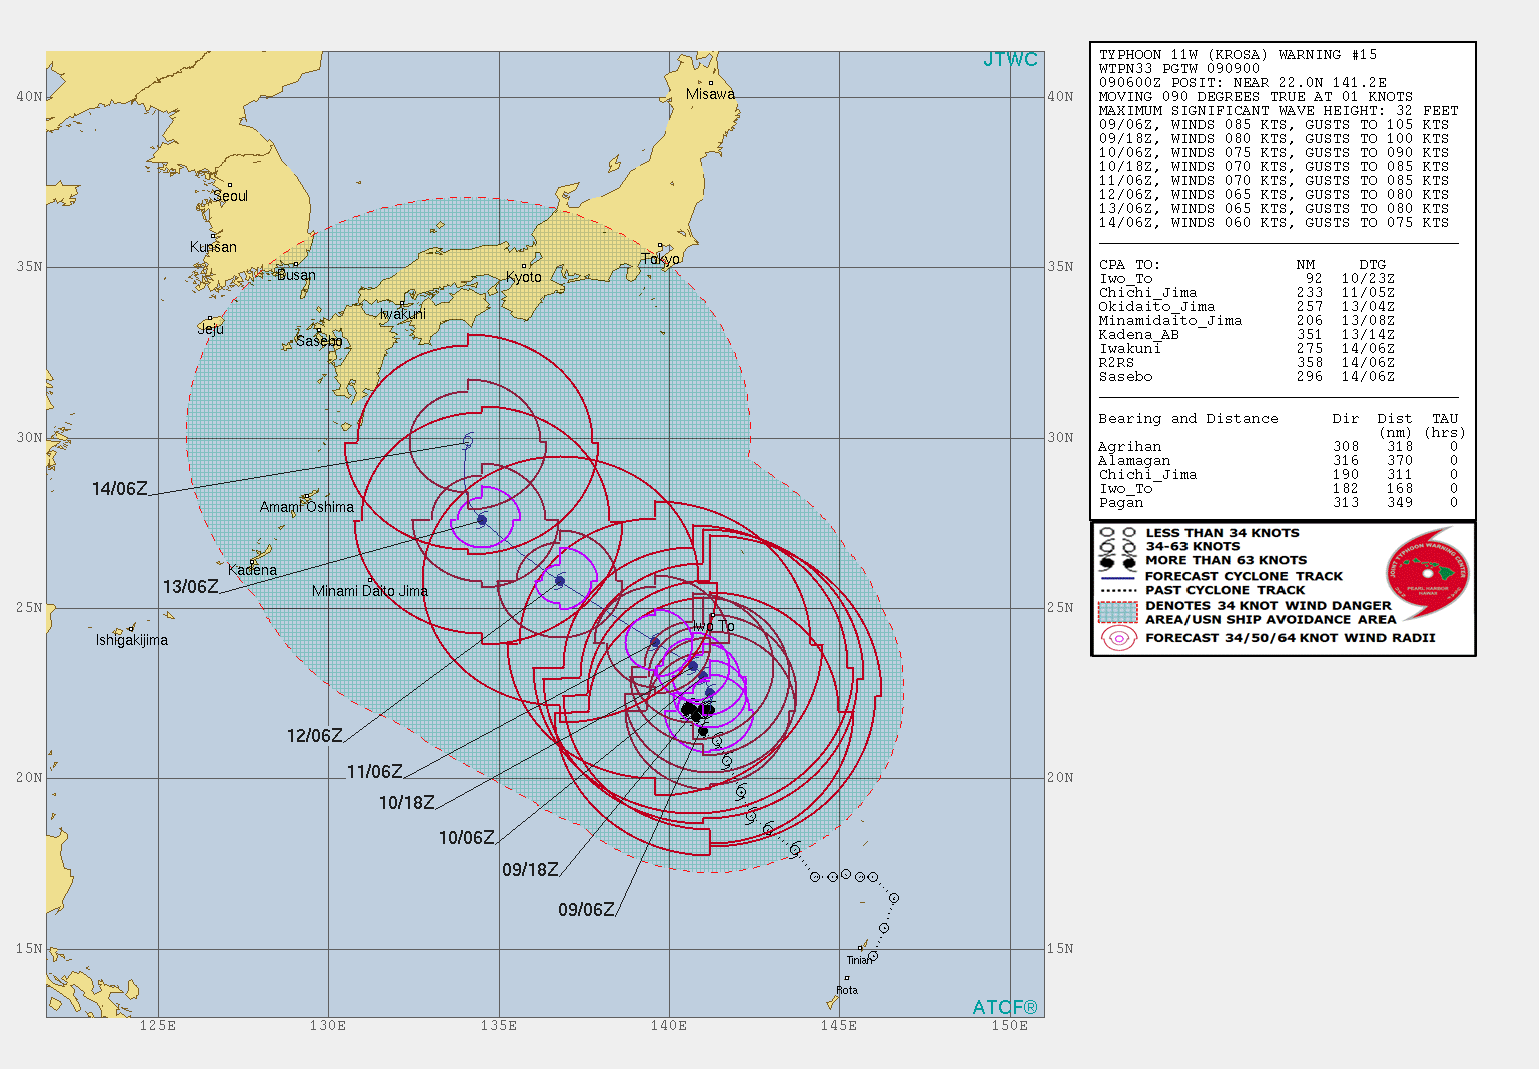 KROSA(11W): WARNING 15. FORECAST TO WEAKEN STEADILY NEXT 5 DAYS WHILE APPROACHING SOUTHERN JAPAN